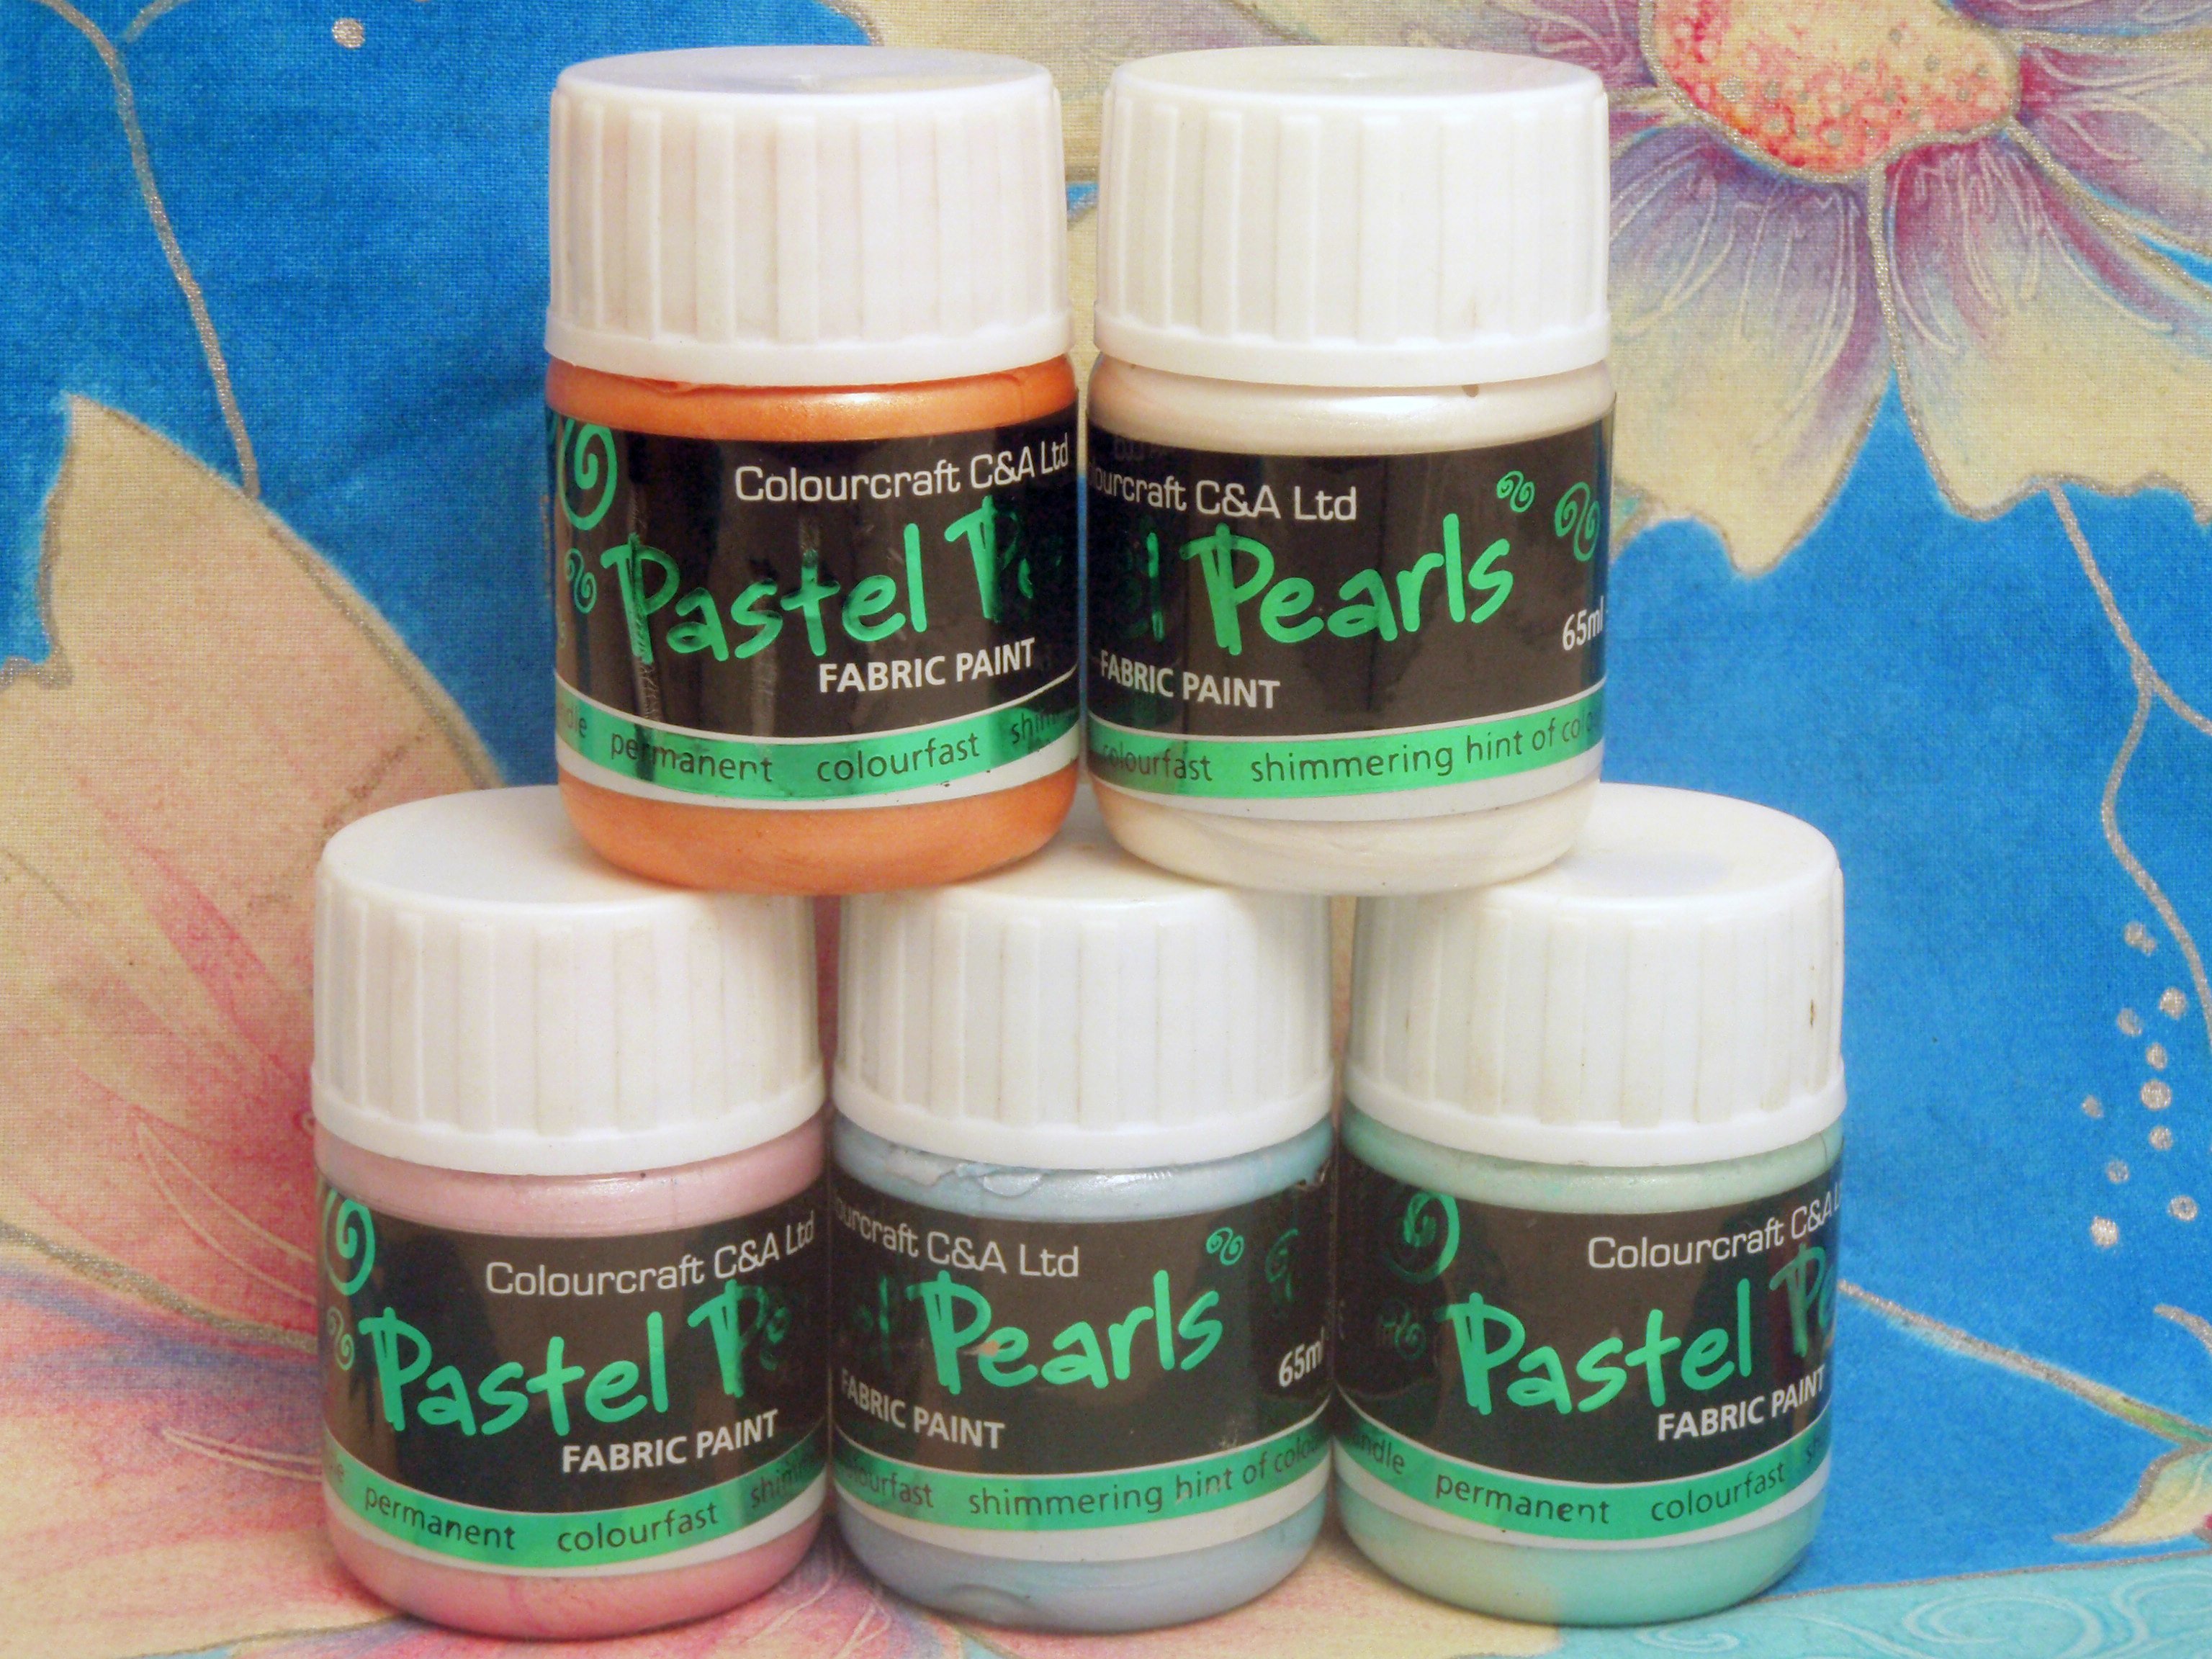 Pastel Pearl Fabric Paint